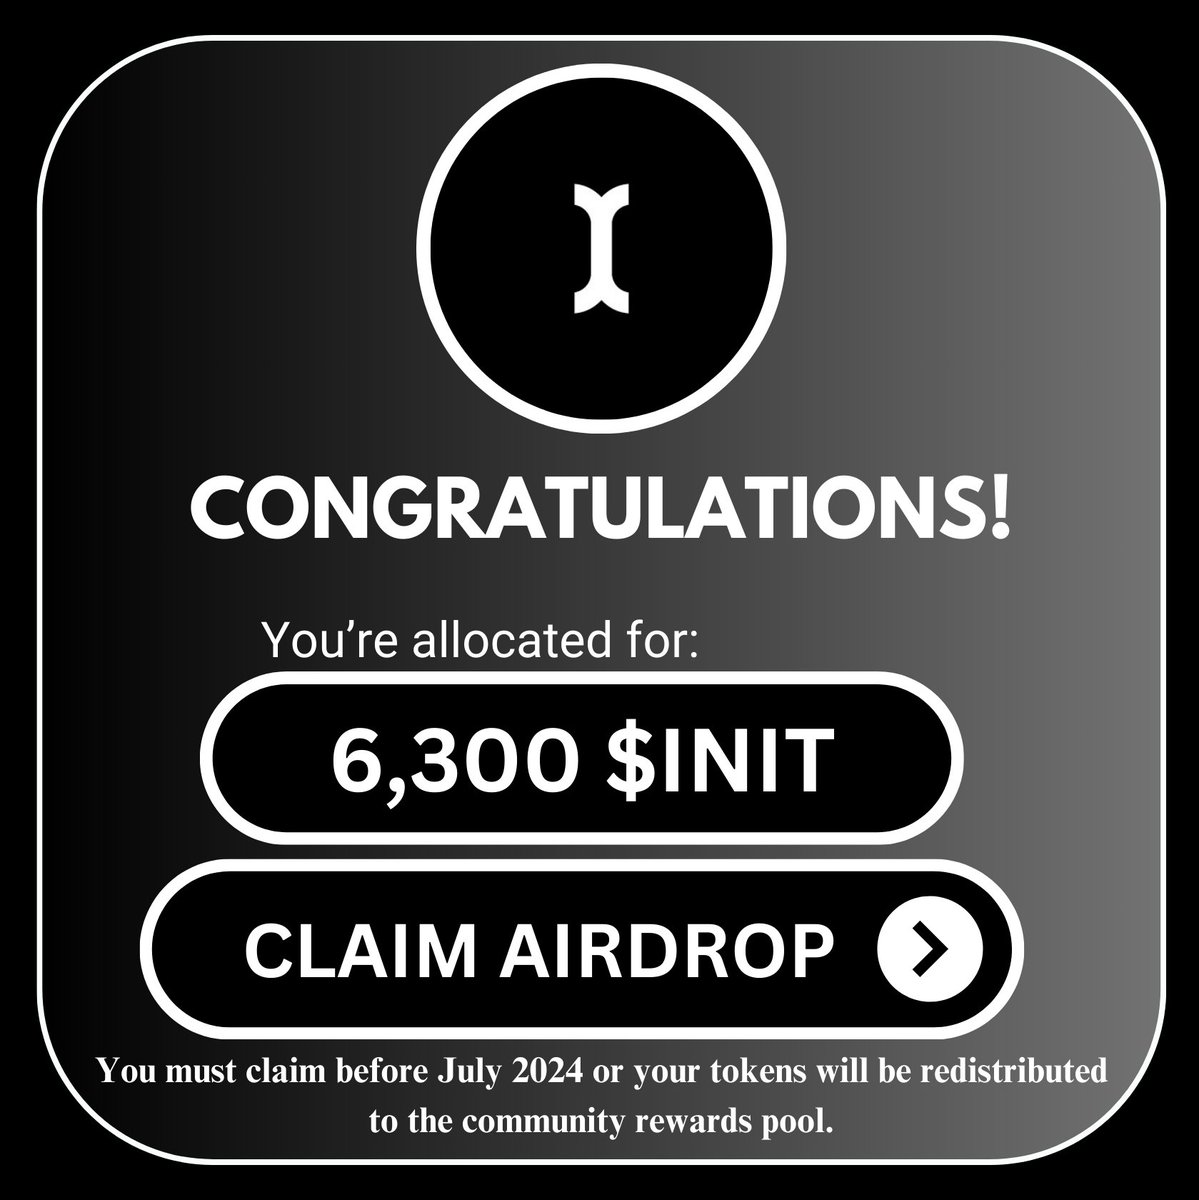 $INIT Airdrop CONFIRMED! 🪂

Raised $7.5M
Backed by @BinanceLabs

Cost: FREE
Time: 5 minutes.
Potential rewards: $2000

Follow my step-by-step guide to secure $INIT AIRDROP!
👇🧵